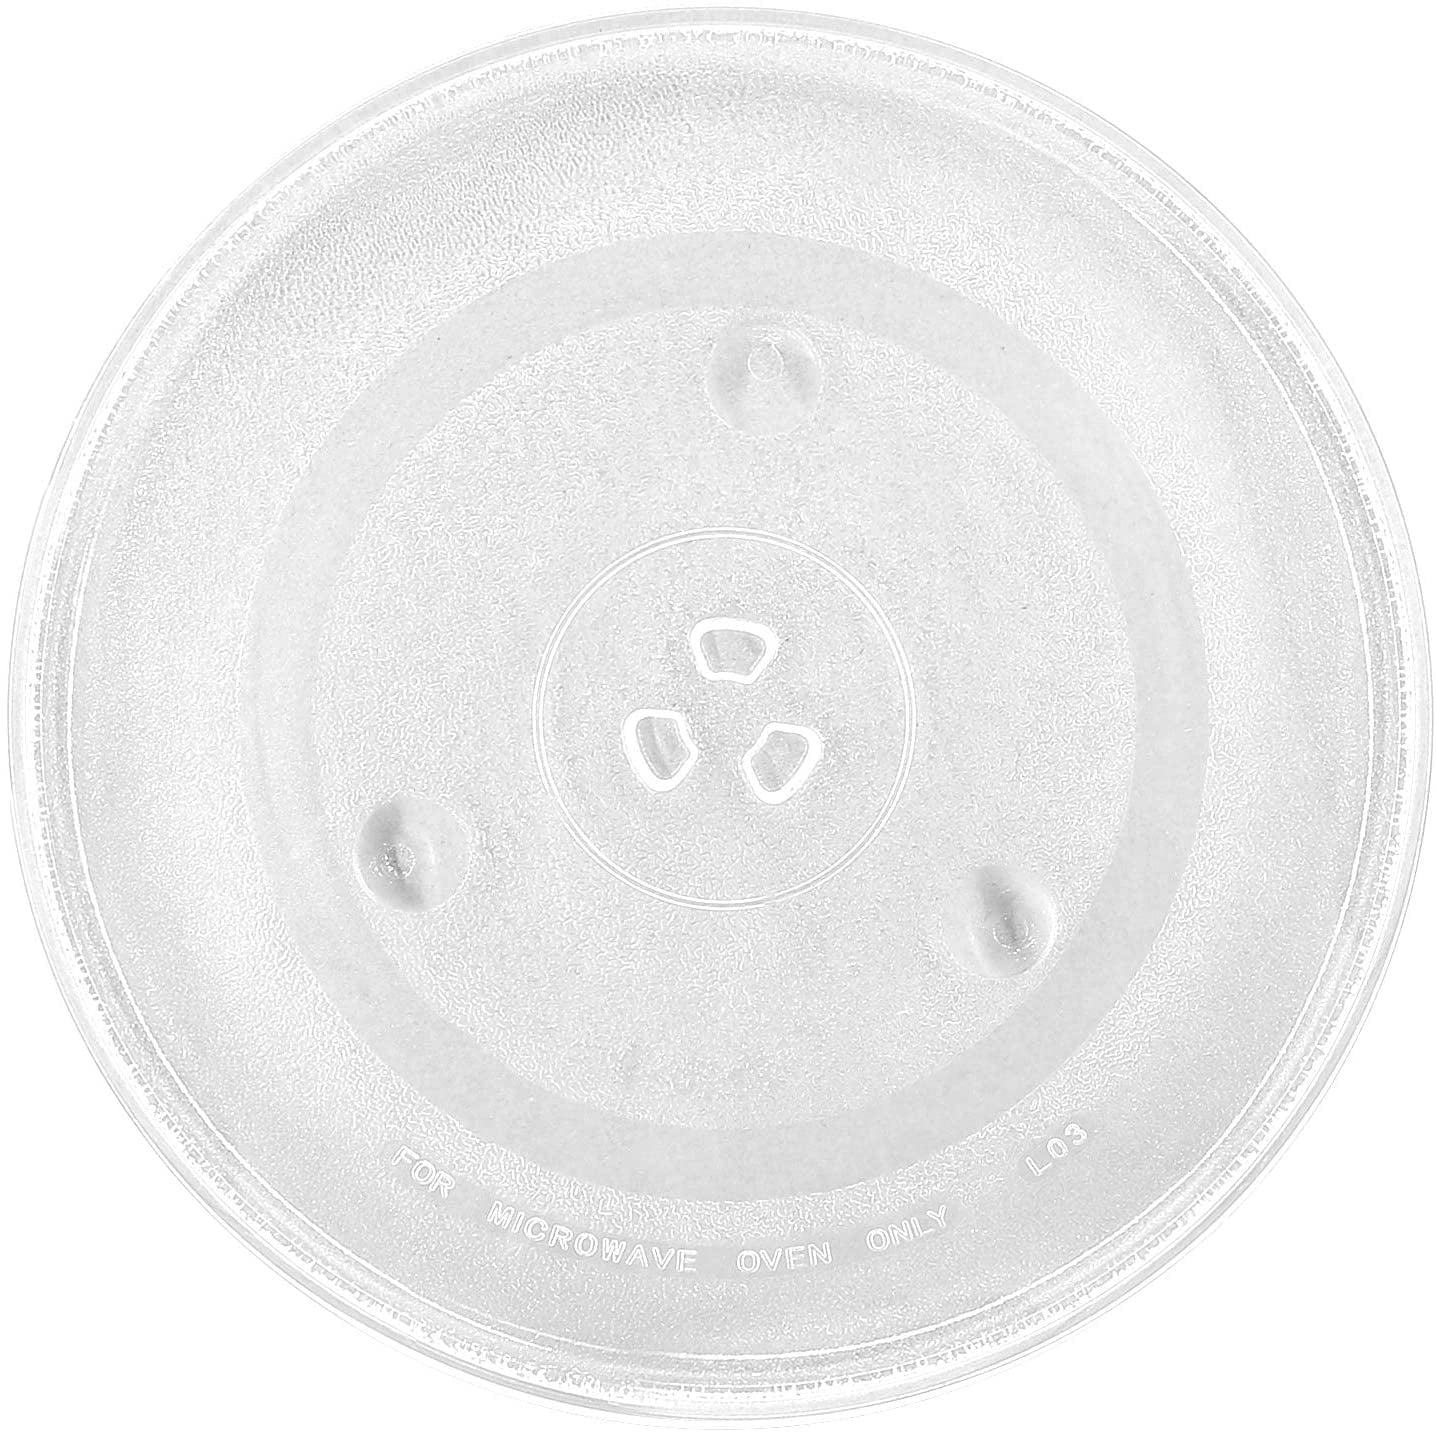 UNIVERSAL MICROWAVE OVEN GLASS ROUND TURNTABLE PLATE DISH 315mm 3 FIXING HOLES